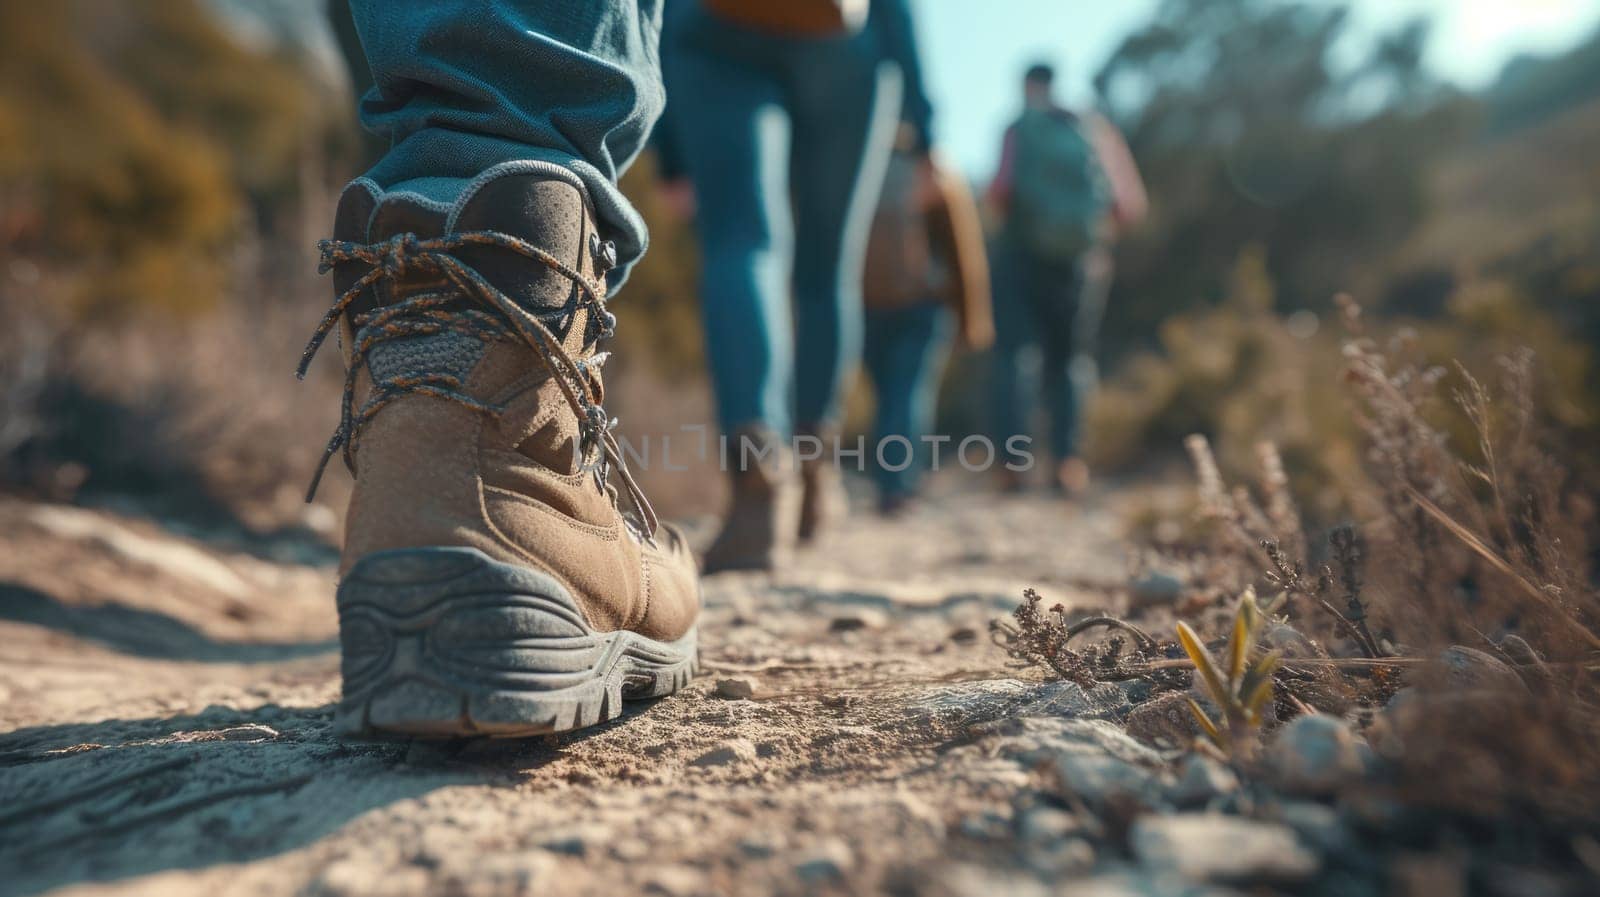 A person wearing hiking boots is walking down a path in the woods AIG41 by biancoblue